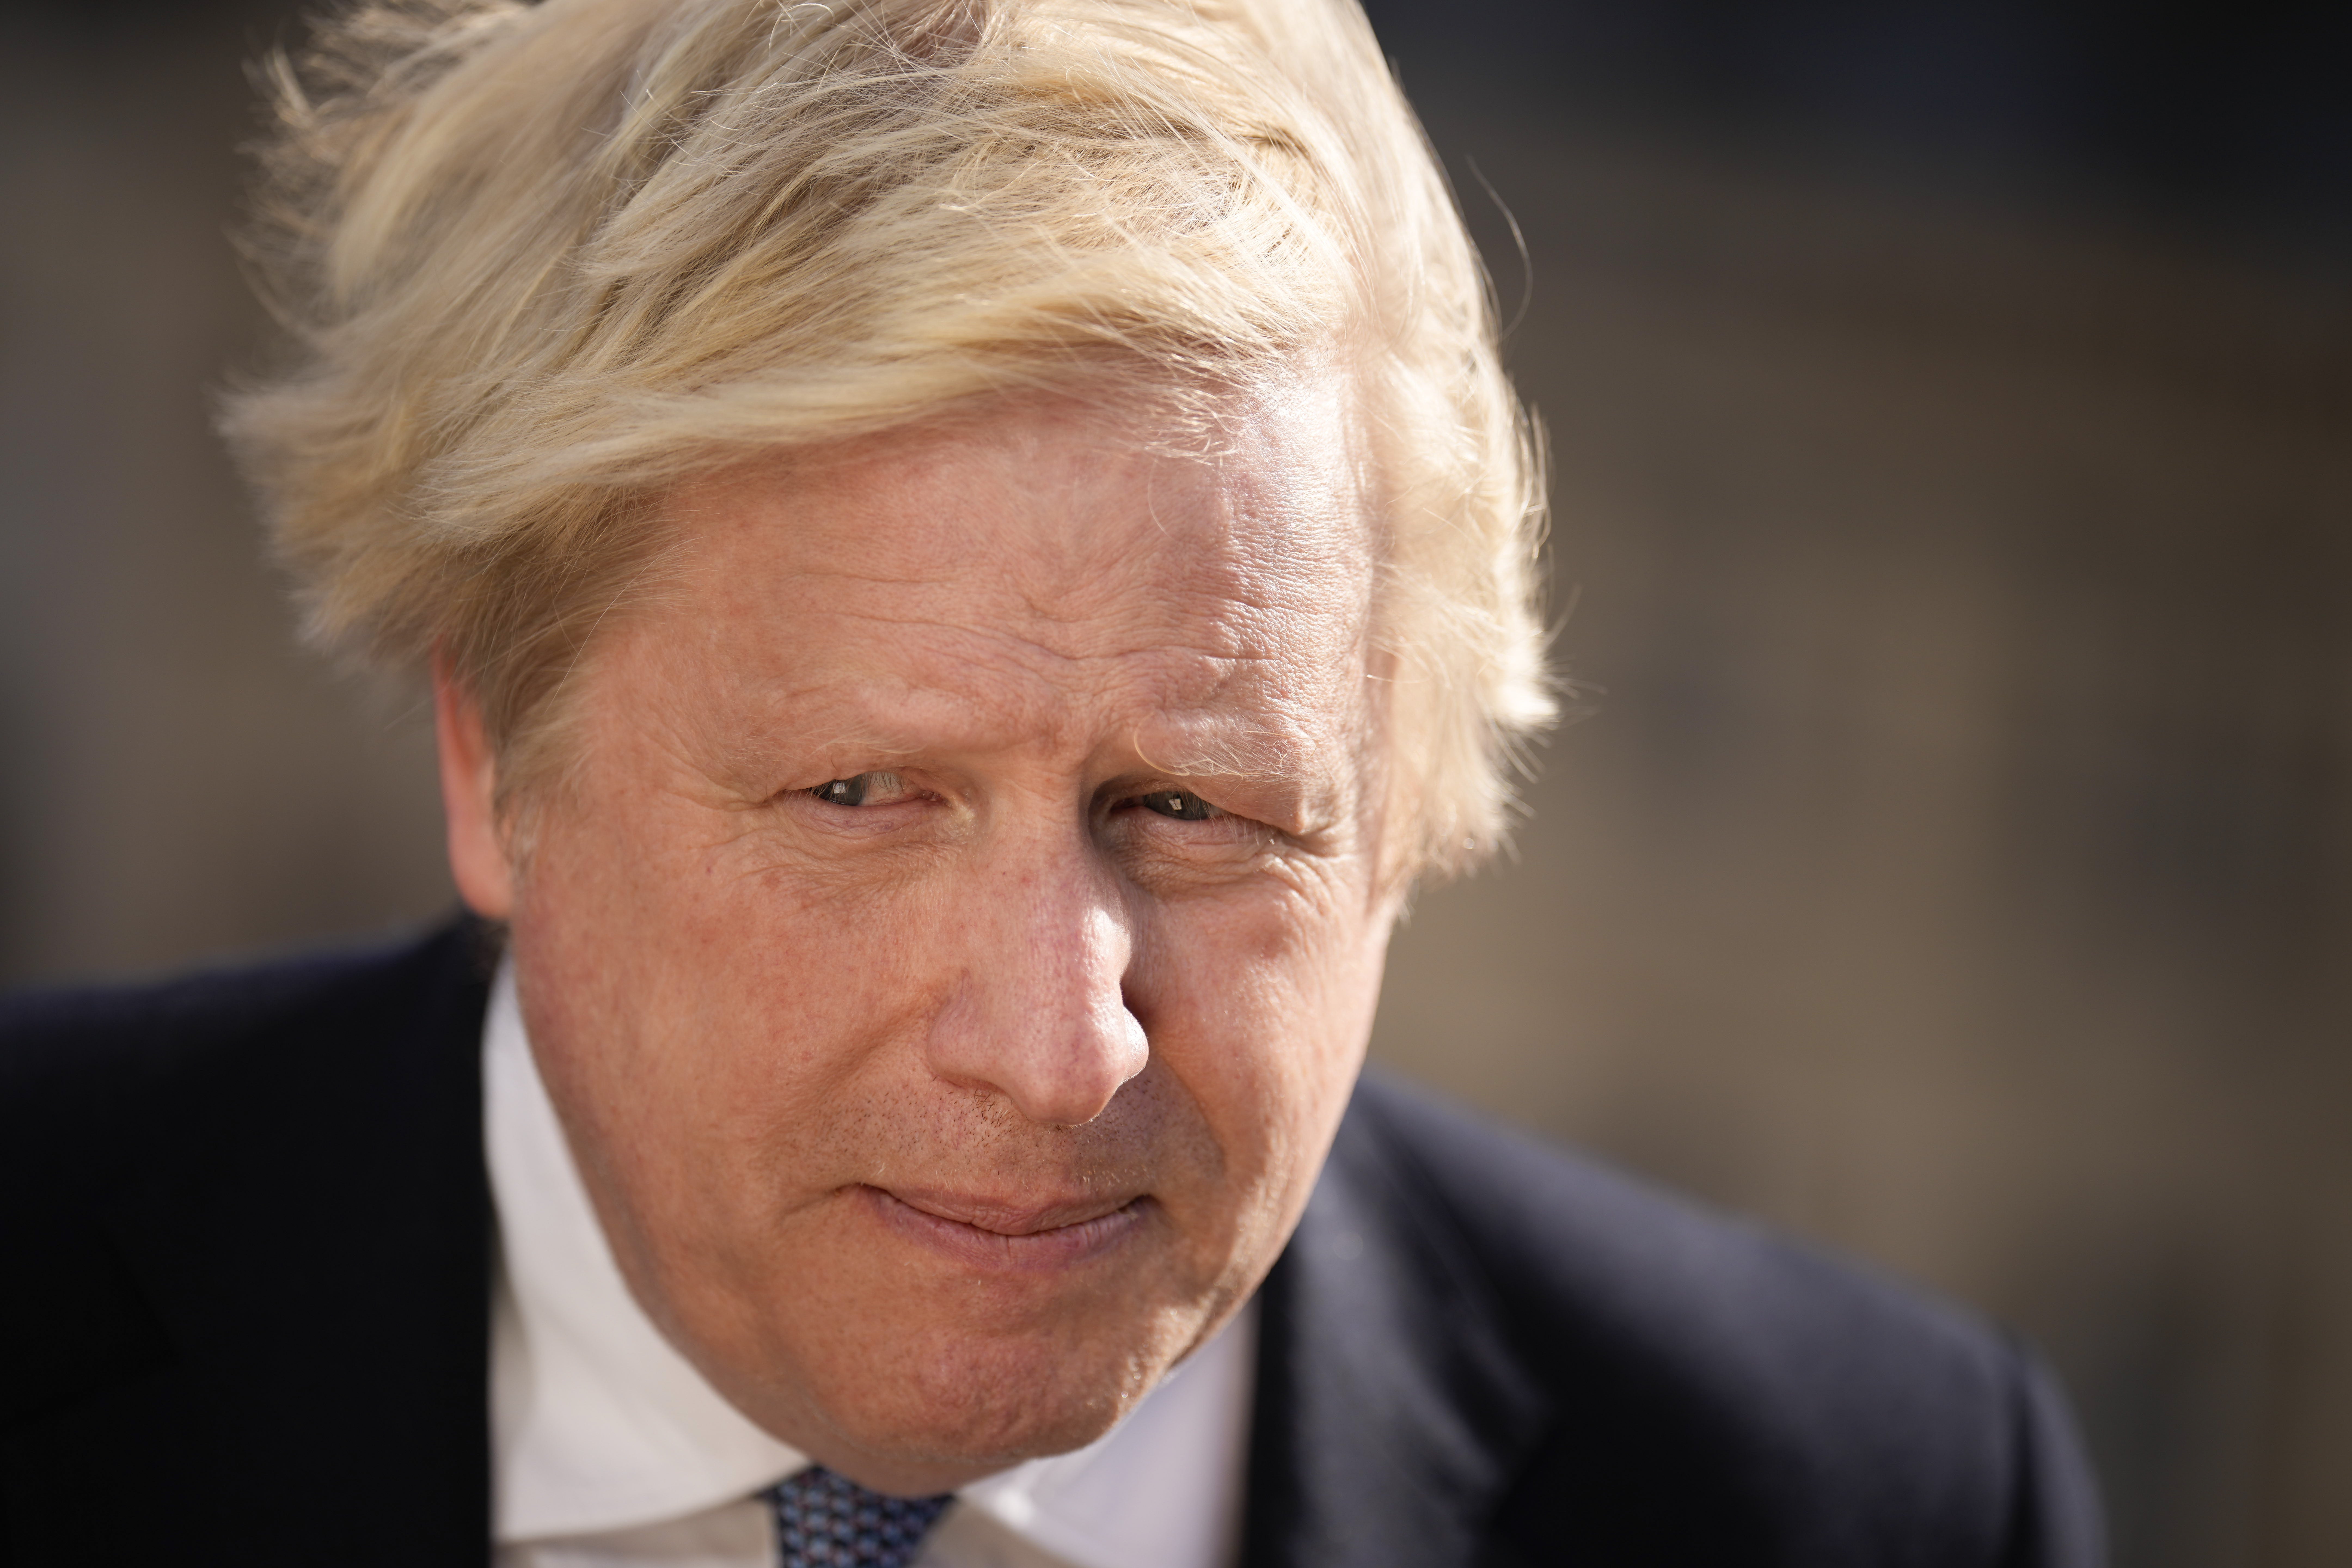 Nine out of 10 readers told us at the end of January they think Boris Johnson should resign